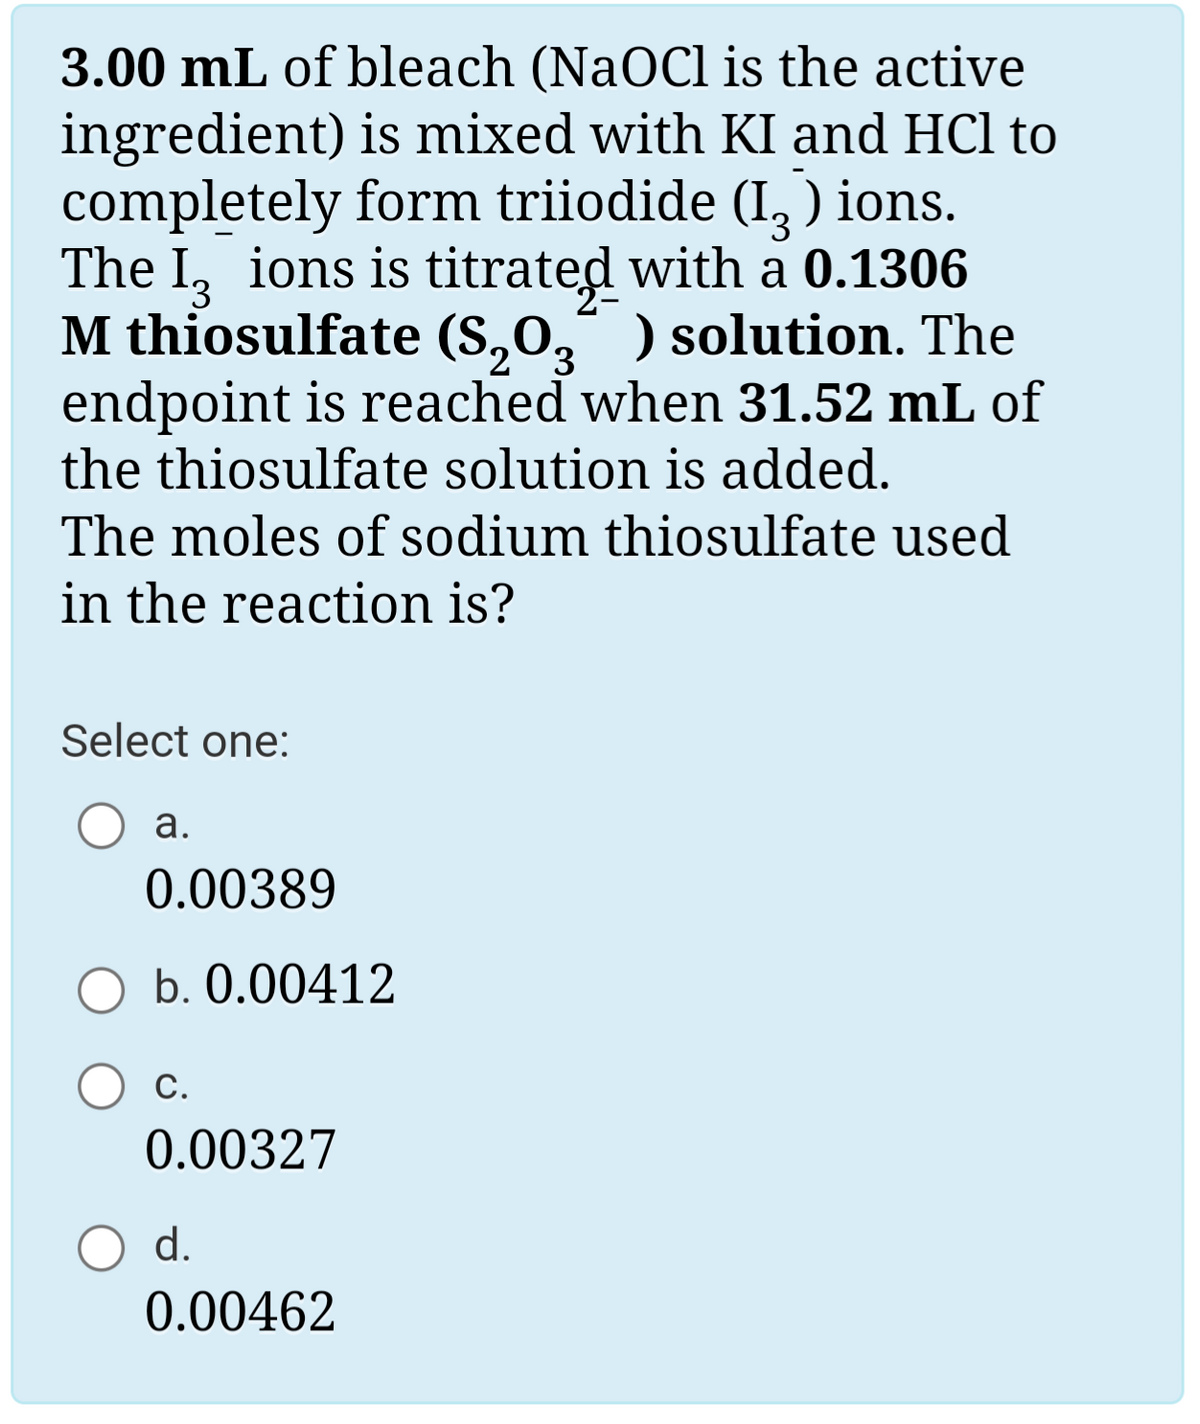 3.00 mL of bleach (NaOCl is the active
ingredient) is mixed with KI and HCl to
completely form triiodide (I, ) ions.
The I, ions is titrated with a 0.1306
M thiosulfate (S,0," ) solution. The
3.
endpoint is reached when 31.52 mL of
the thiosulfate solution is added.
The moles of sodium thiosulfate used
in the reaction is?
Select one:
а.
0.00389
b. 0.00412
С.
0.00327
d.
0.00462
